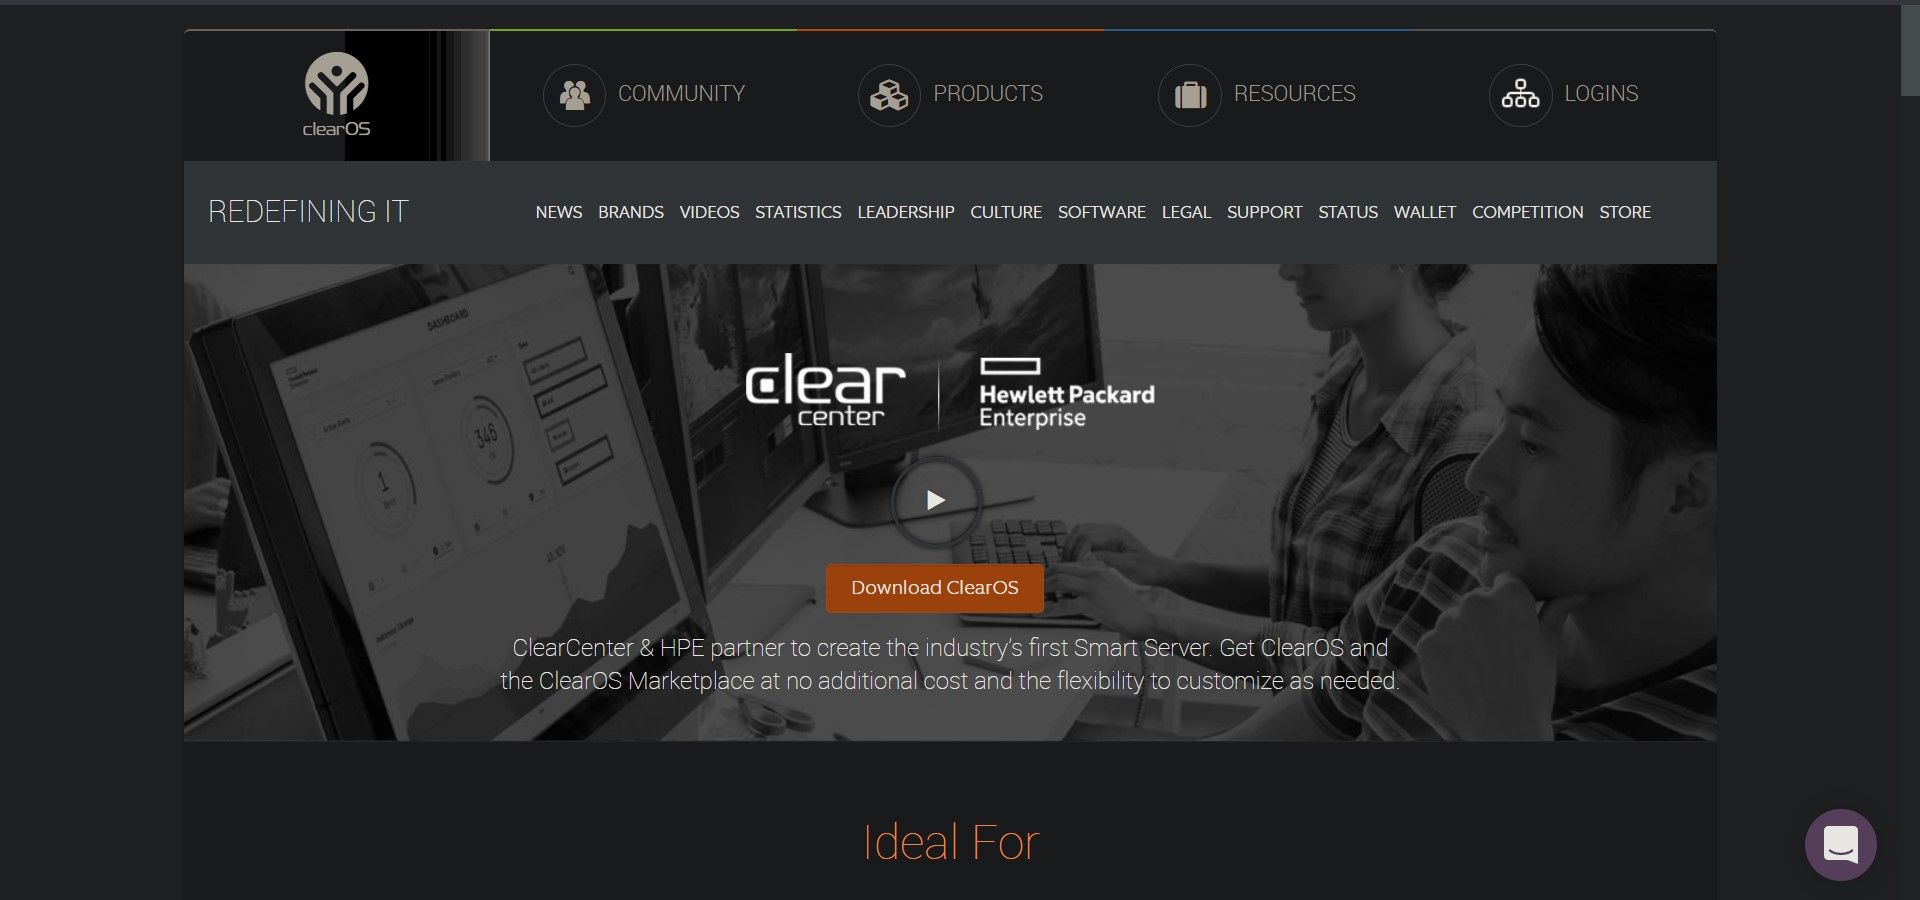 Home Page Of The Clearos Firewall Website